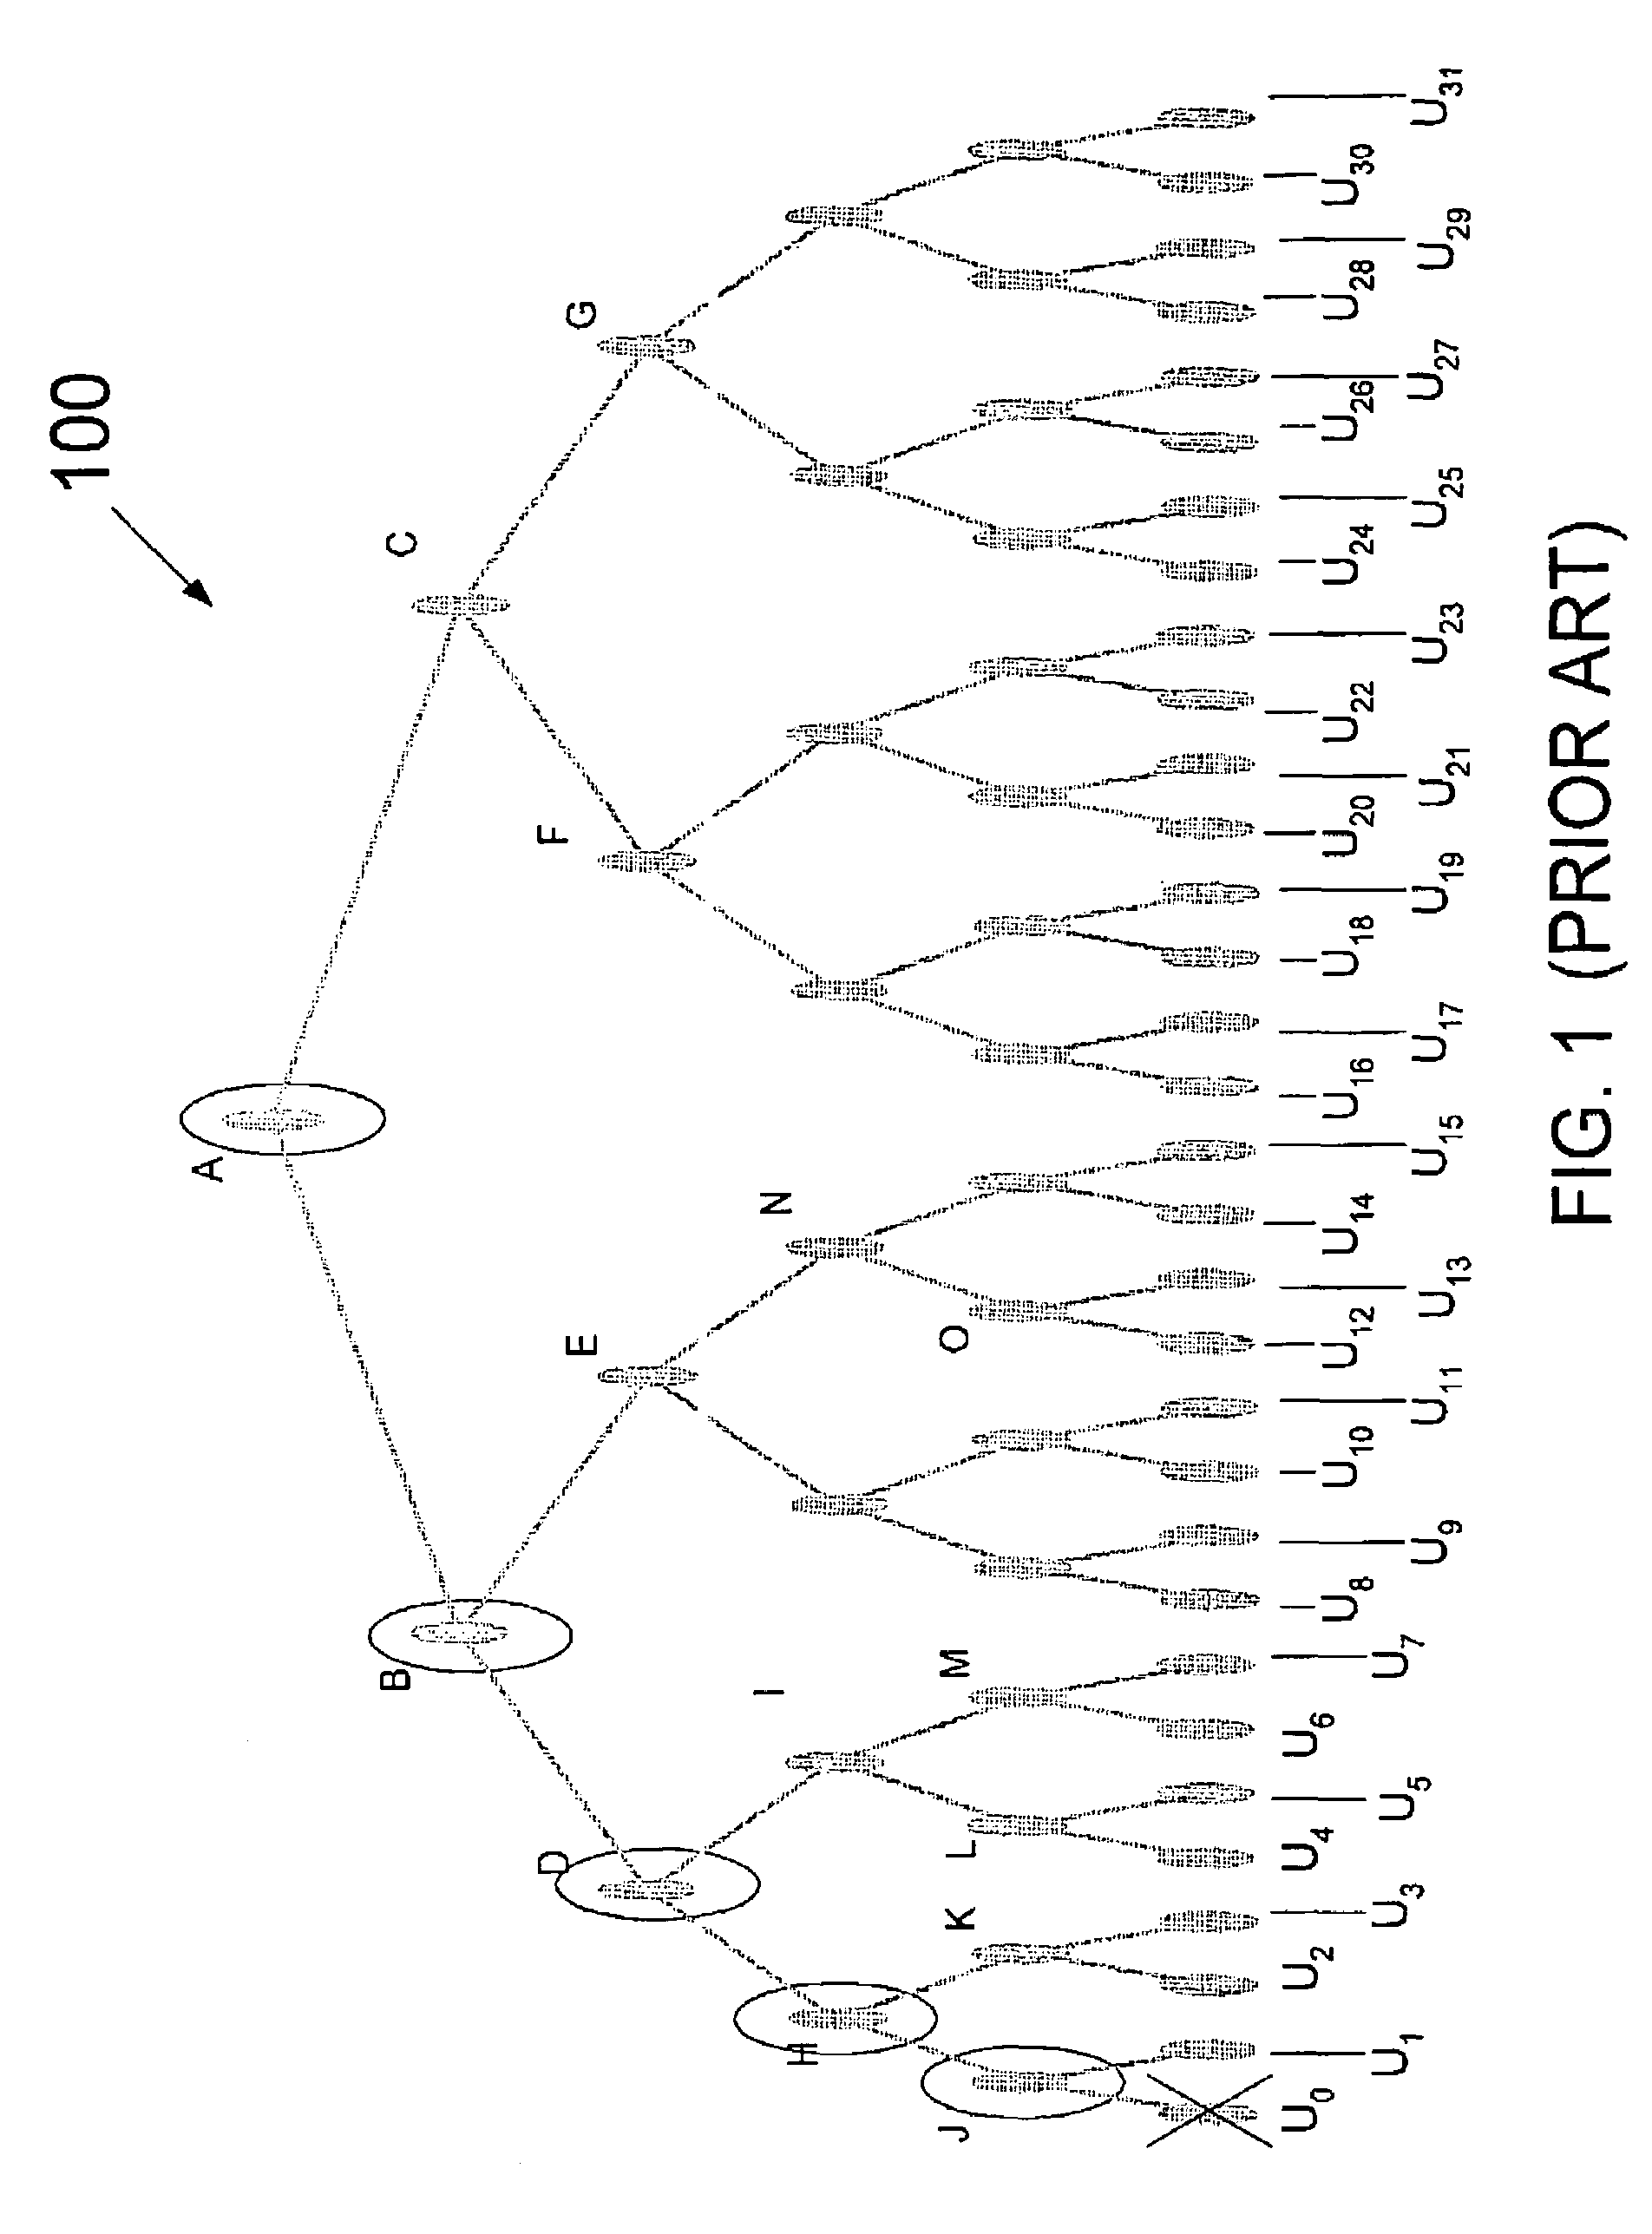 System and method for key distribution in a hierarchical tree